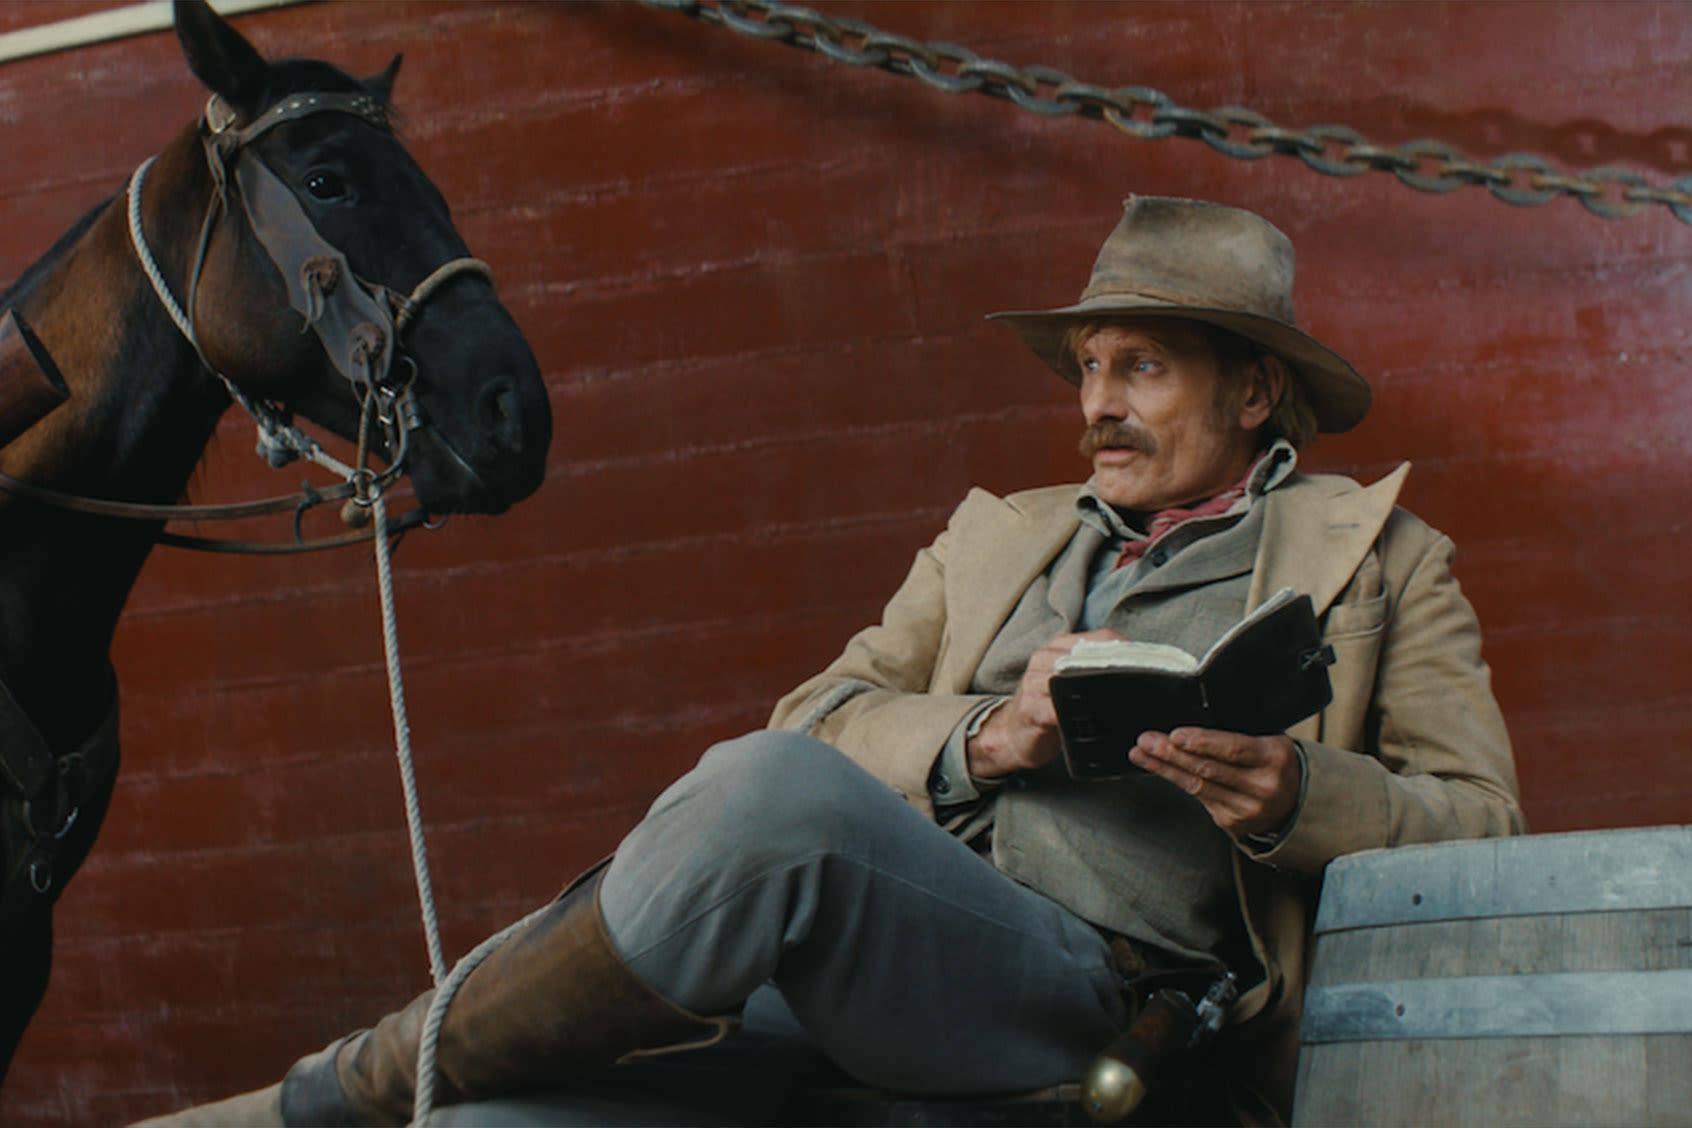 "What you imagine is much more terrible": How Viggo Mortensen made a classic Western feel different